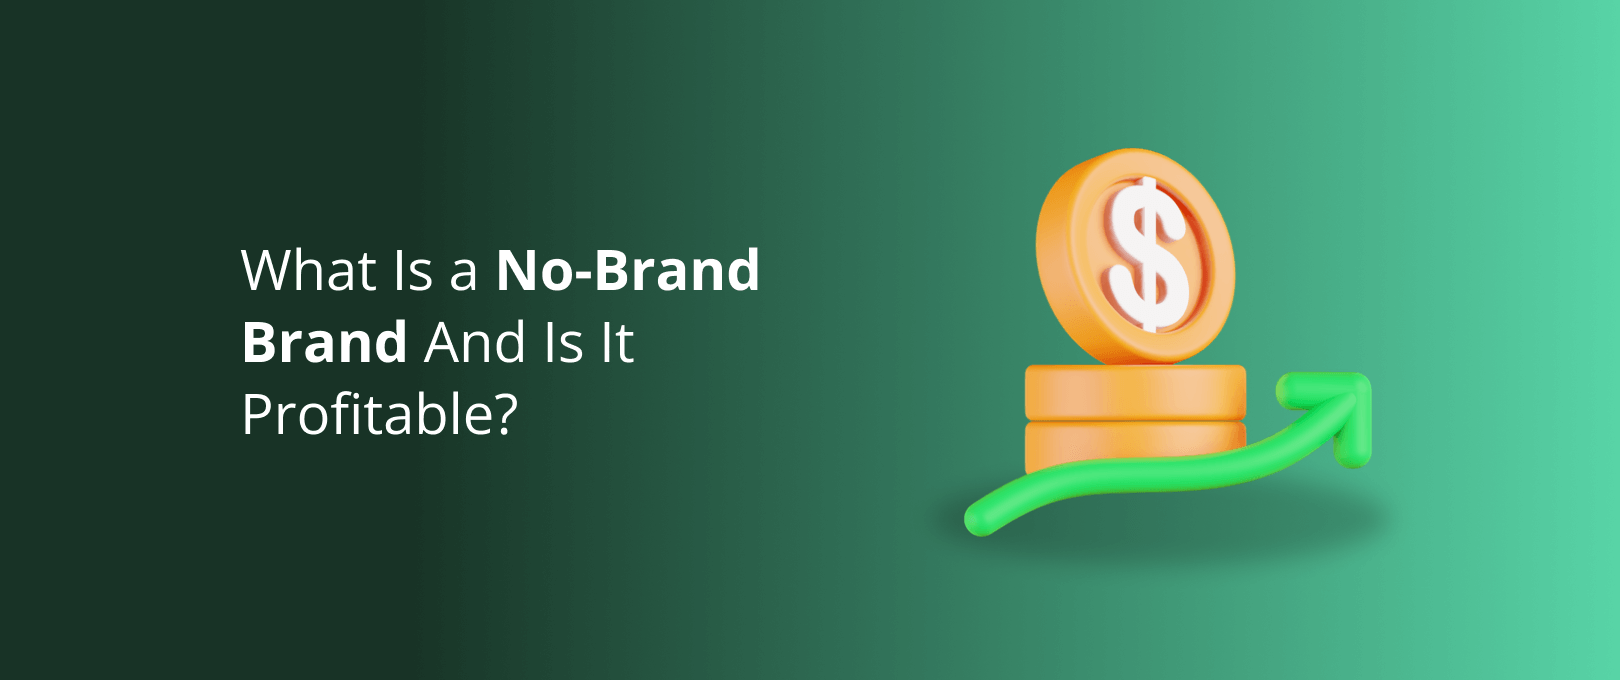 What Is a No-Brand Brand and Is It Profitable? - DevriX